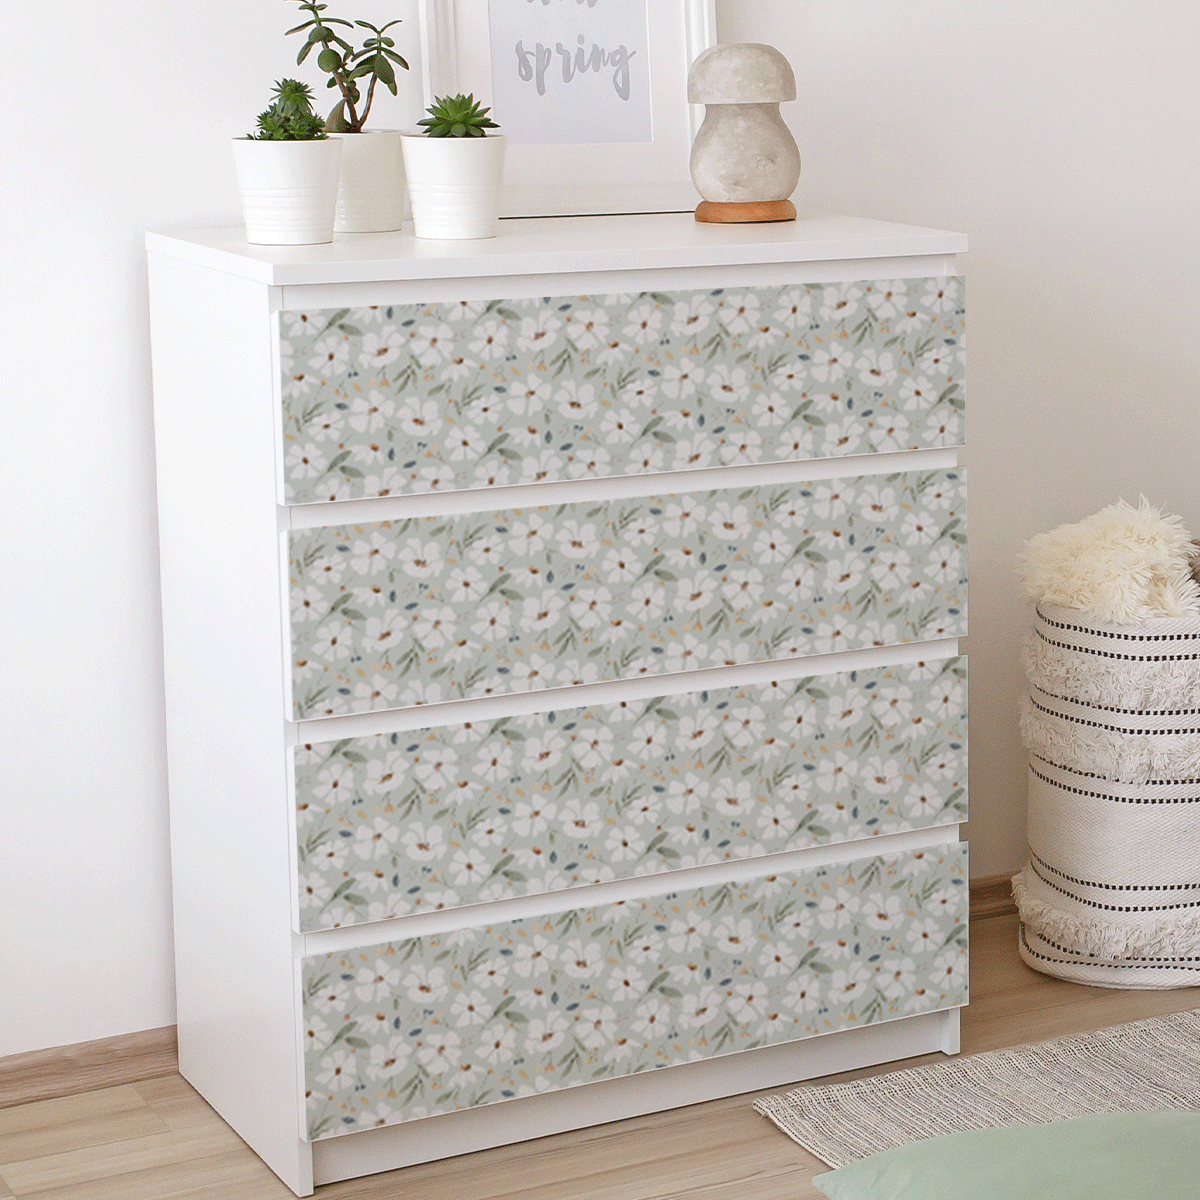 Furniture wrap - Sping flowers (mint)